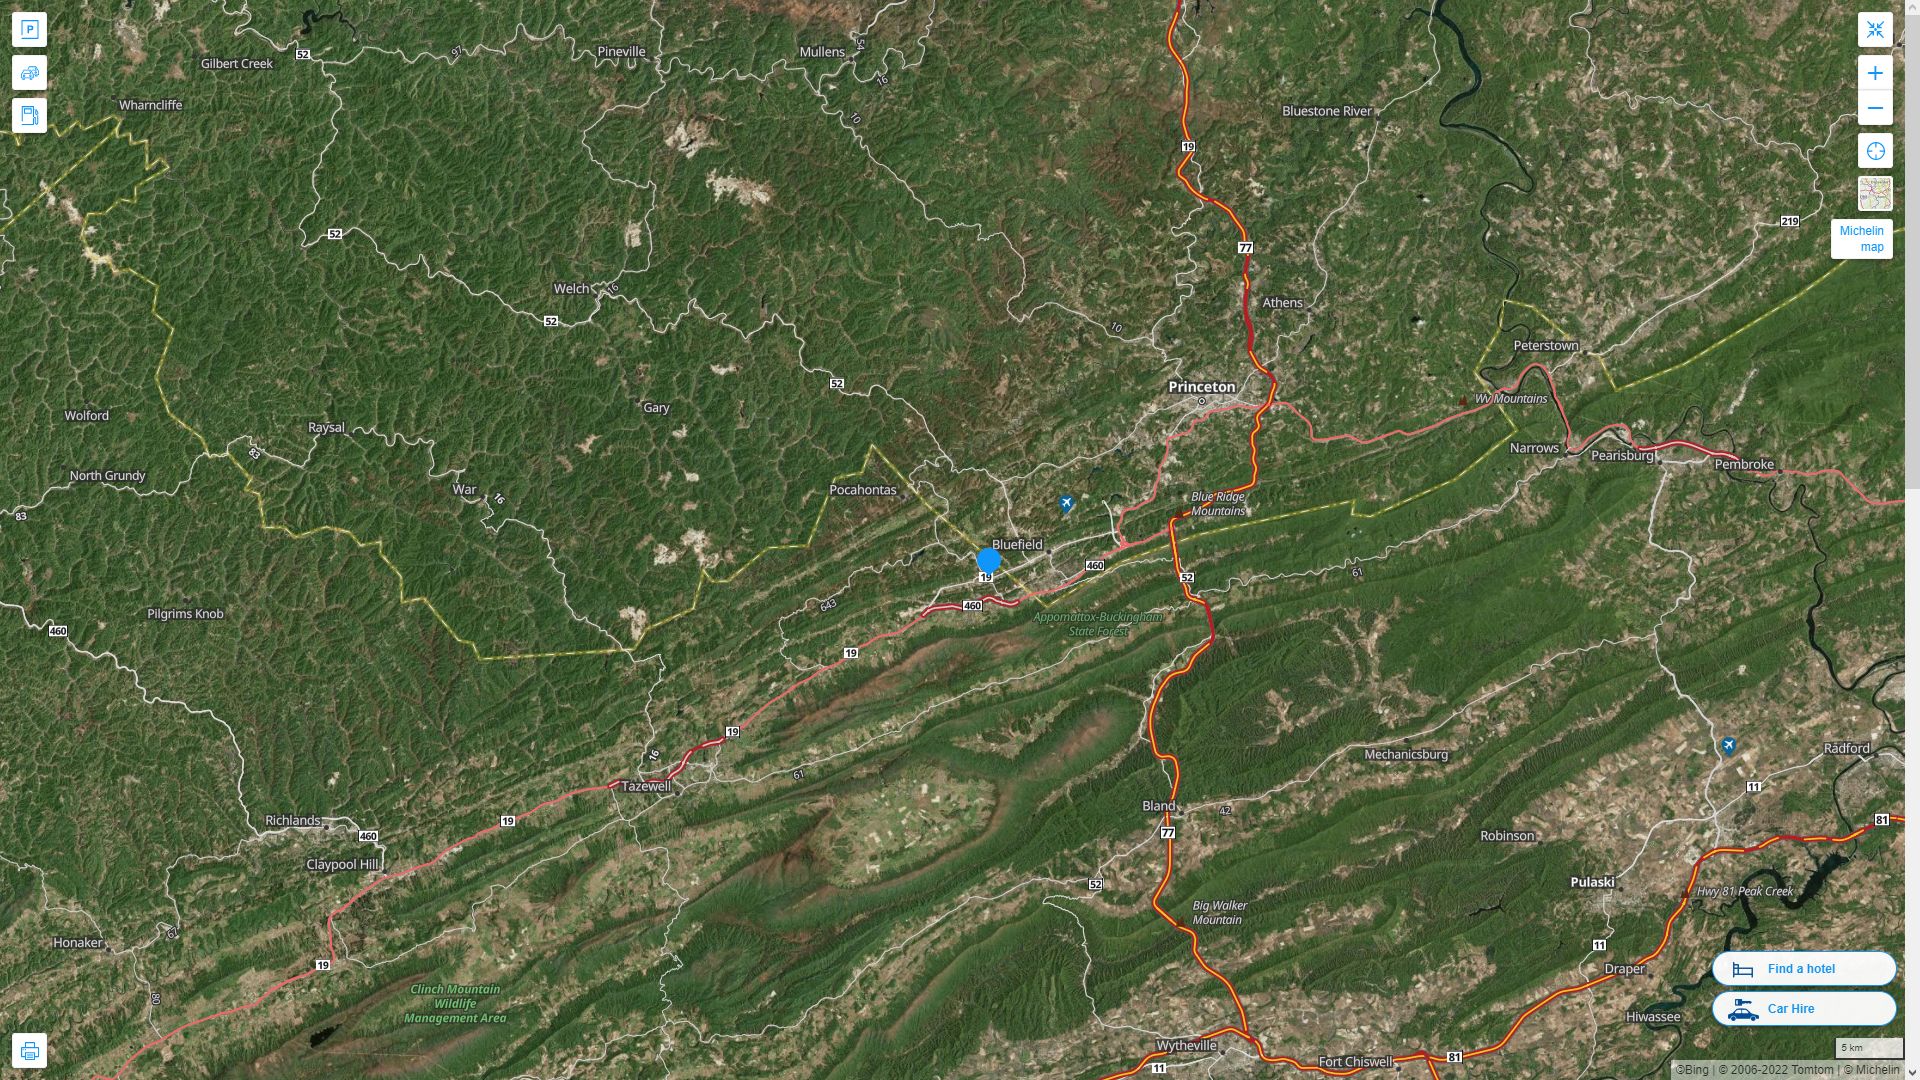 Bluefield West Virginia Highway and Road Map with Satellite View